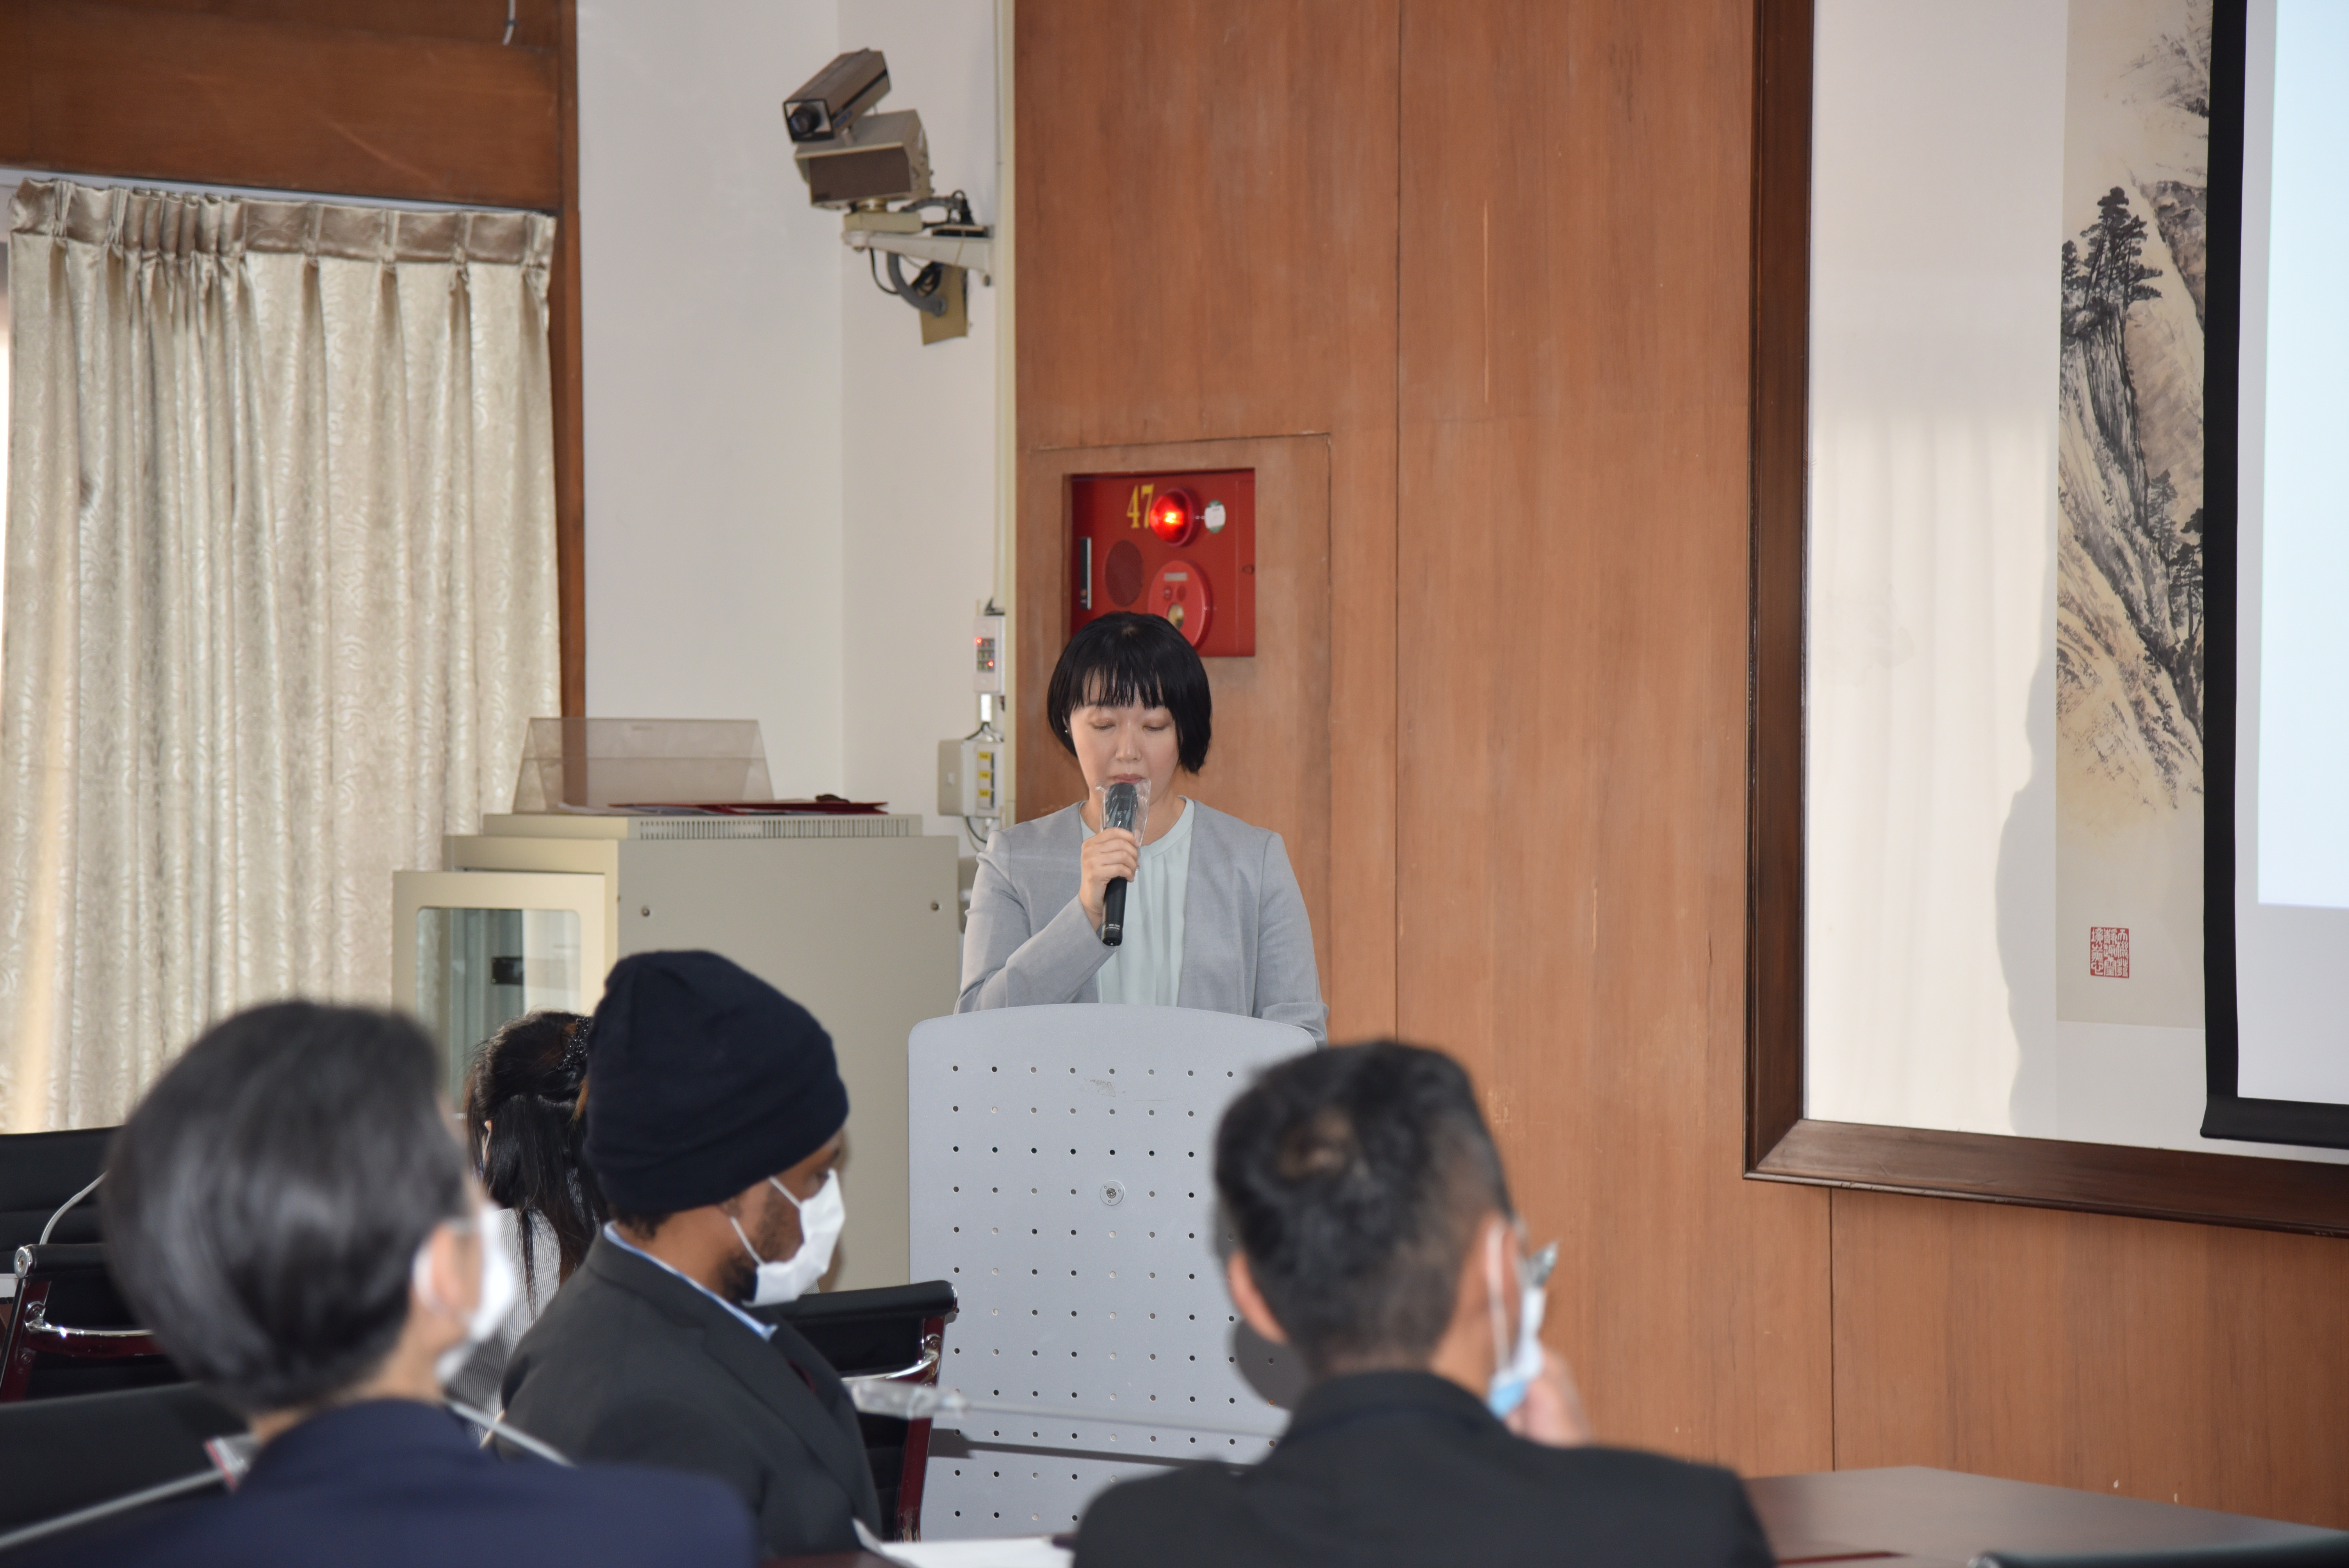 2021 Presentations of MOFA Taiwan Fellowship Scholars: Stability and Prosperity in the Indo-Pacific Region  – Taiwan